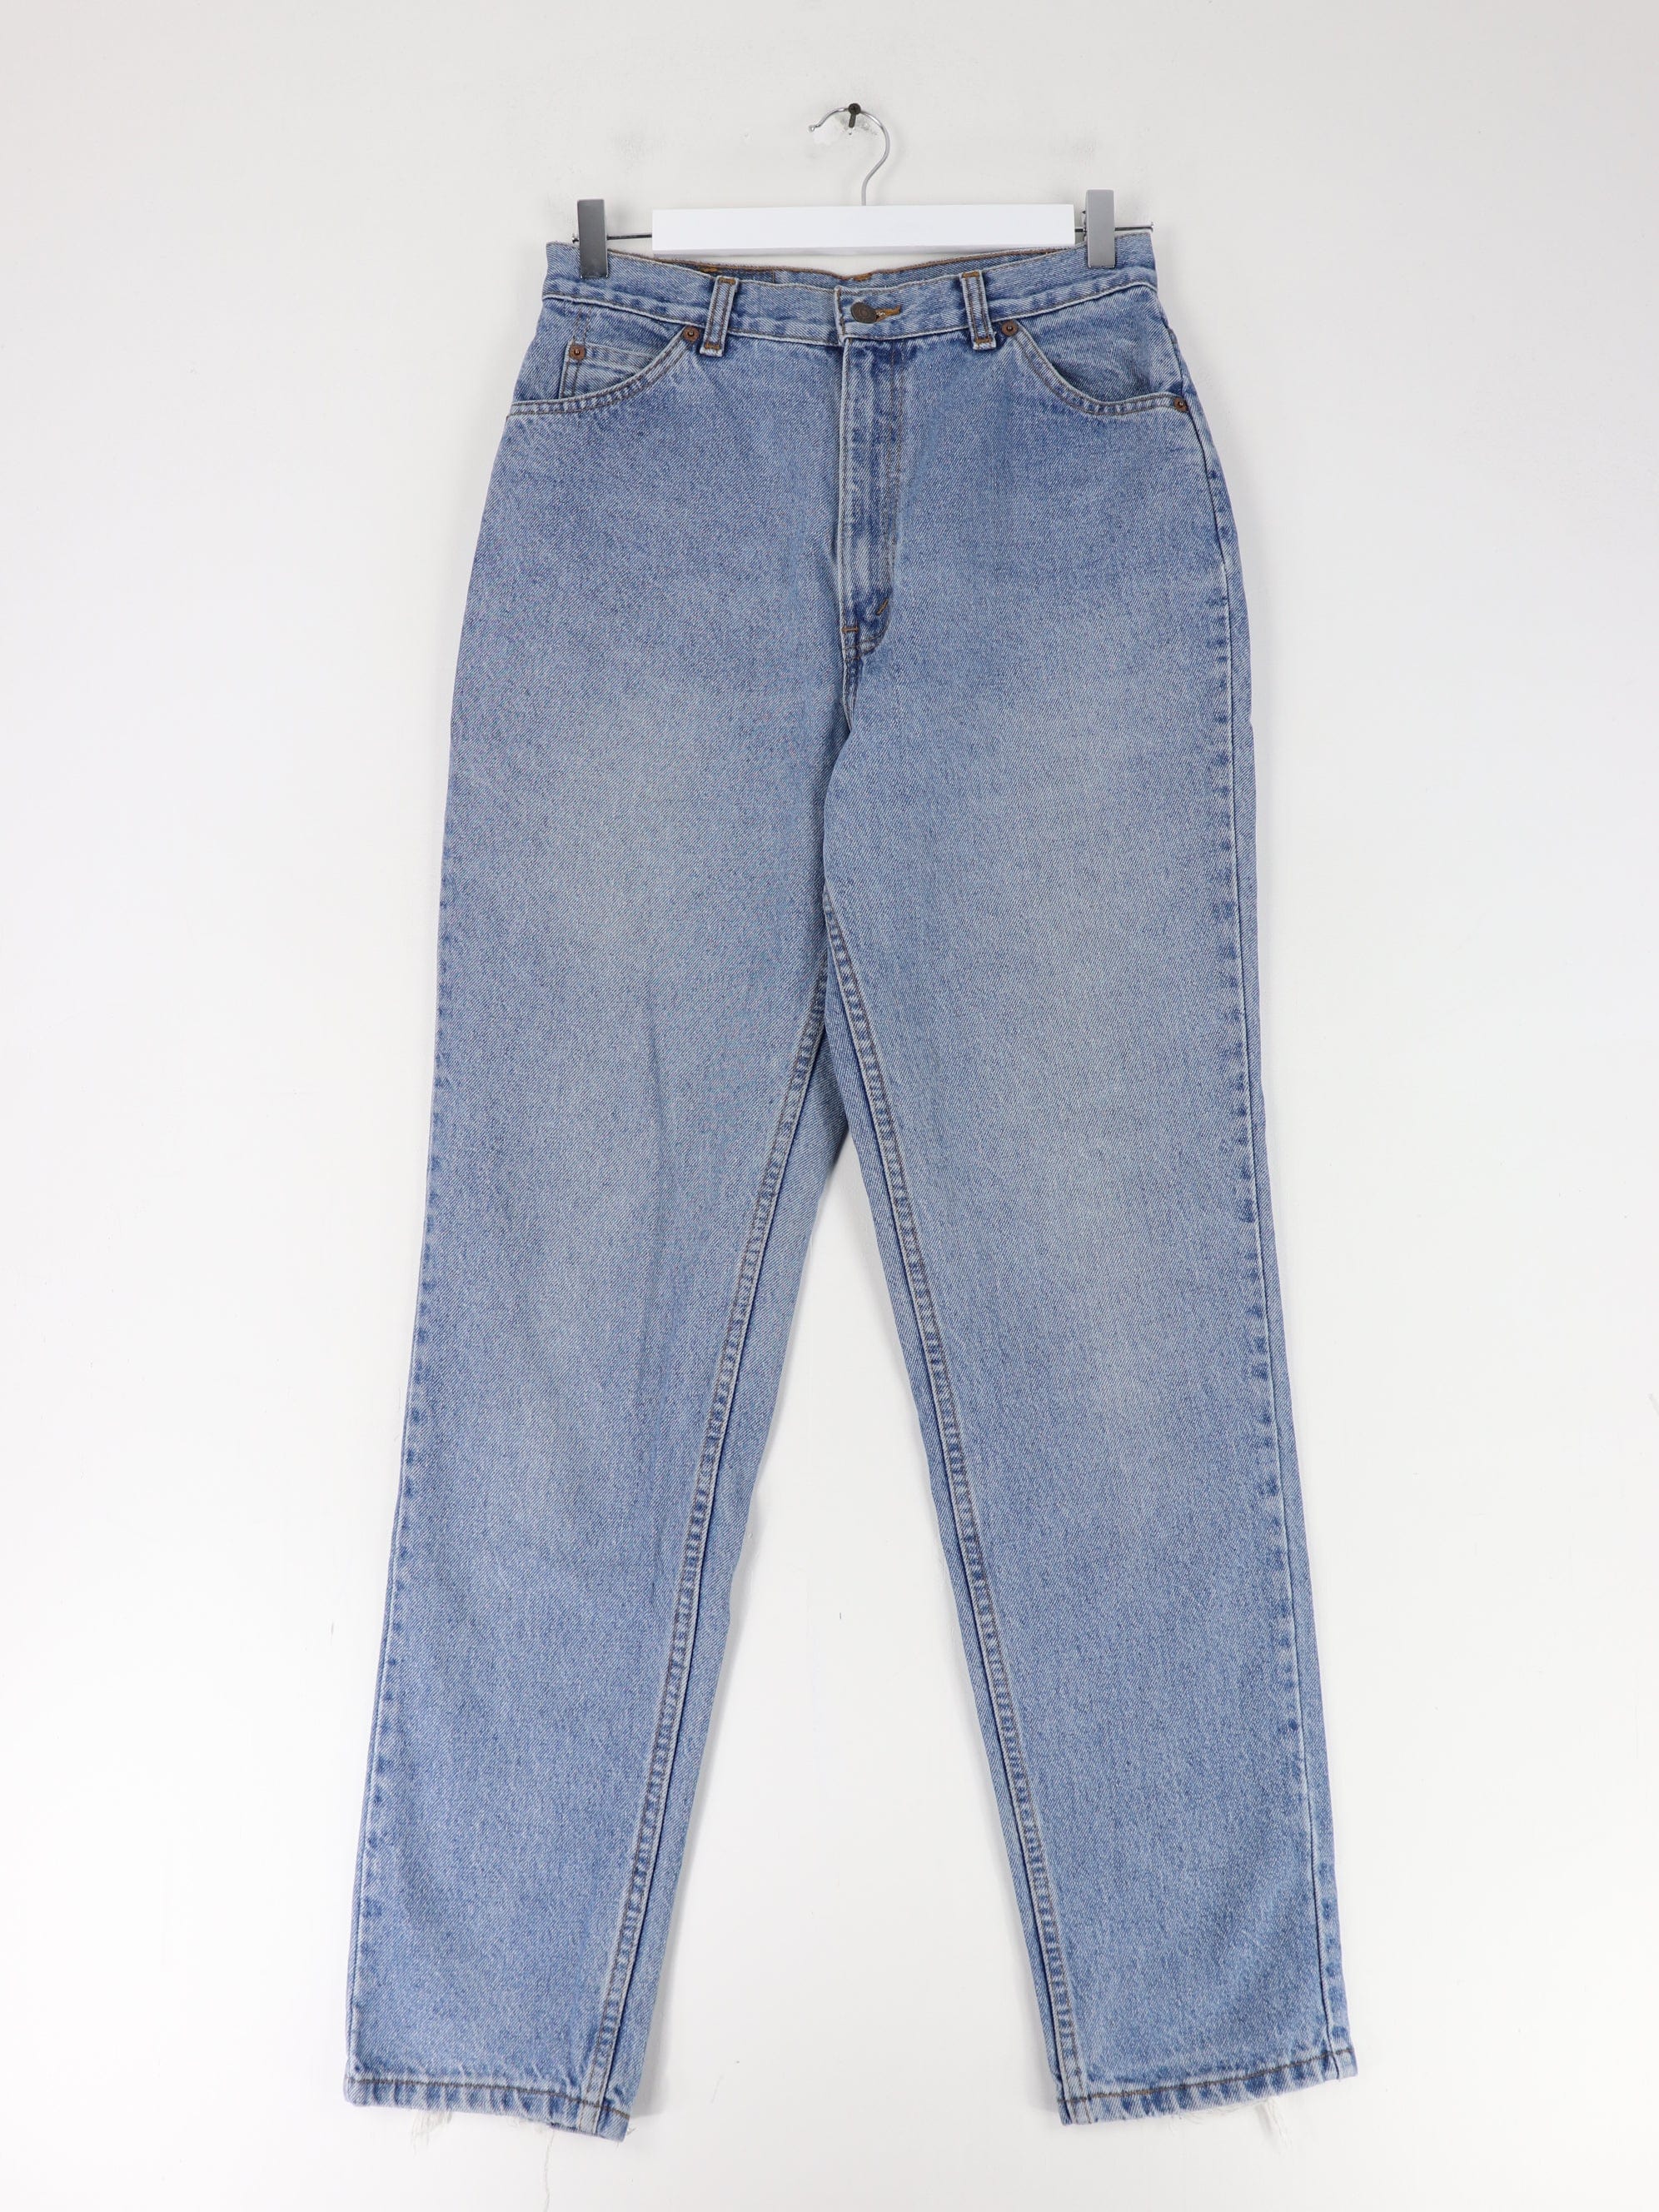 High Waisted Taper Women's Jeans - Light Wash